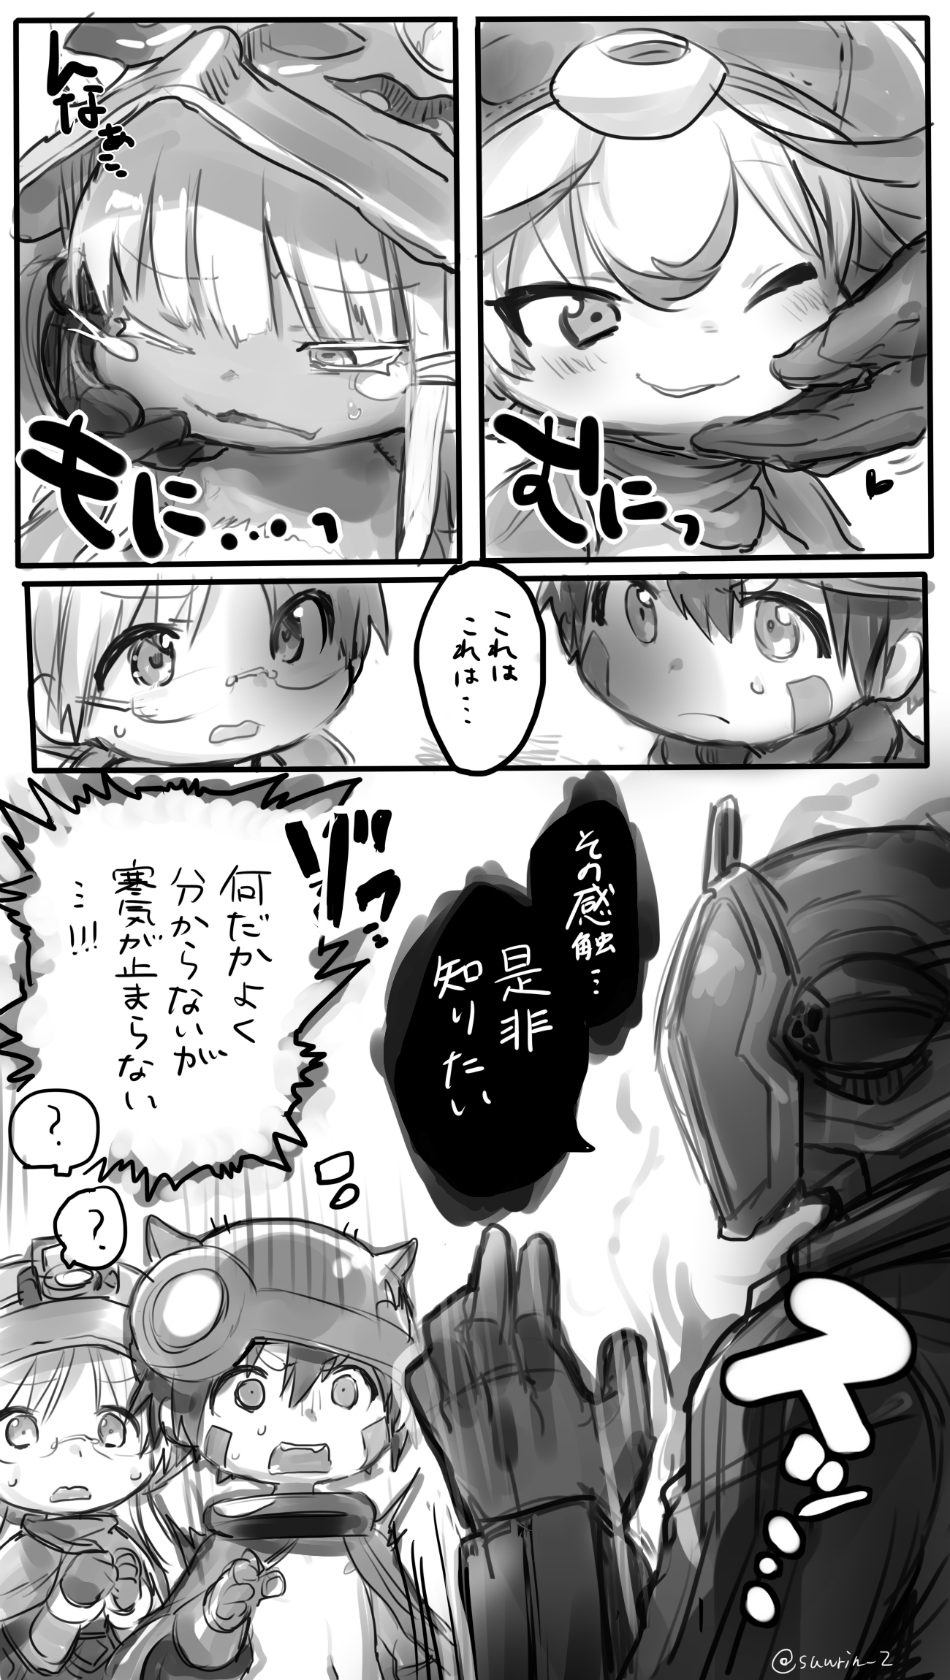 2boys 2girls :3 ? animal_ears bondrewd closed_mouth collar comic commentary_request ears_through_headwear eyebrows_visible_through_hair frown furry glasses gloves greyscale hat helmet highres horned_helmet made_in_abyss metal_collar monochrome multiple_boys multiple_girls nanachi_(made_in_abyss) one_eye_closed open_mouth parted_lips petting prushka regu_(made_in_abyss) riko_(made_in_abyss) short_hair smile suurin_(ksyaro) sweatdrop translation_request twitter_username whiskers wide-eyed